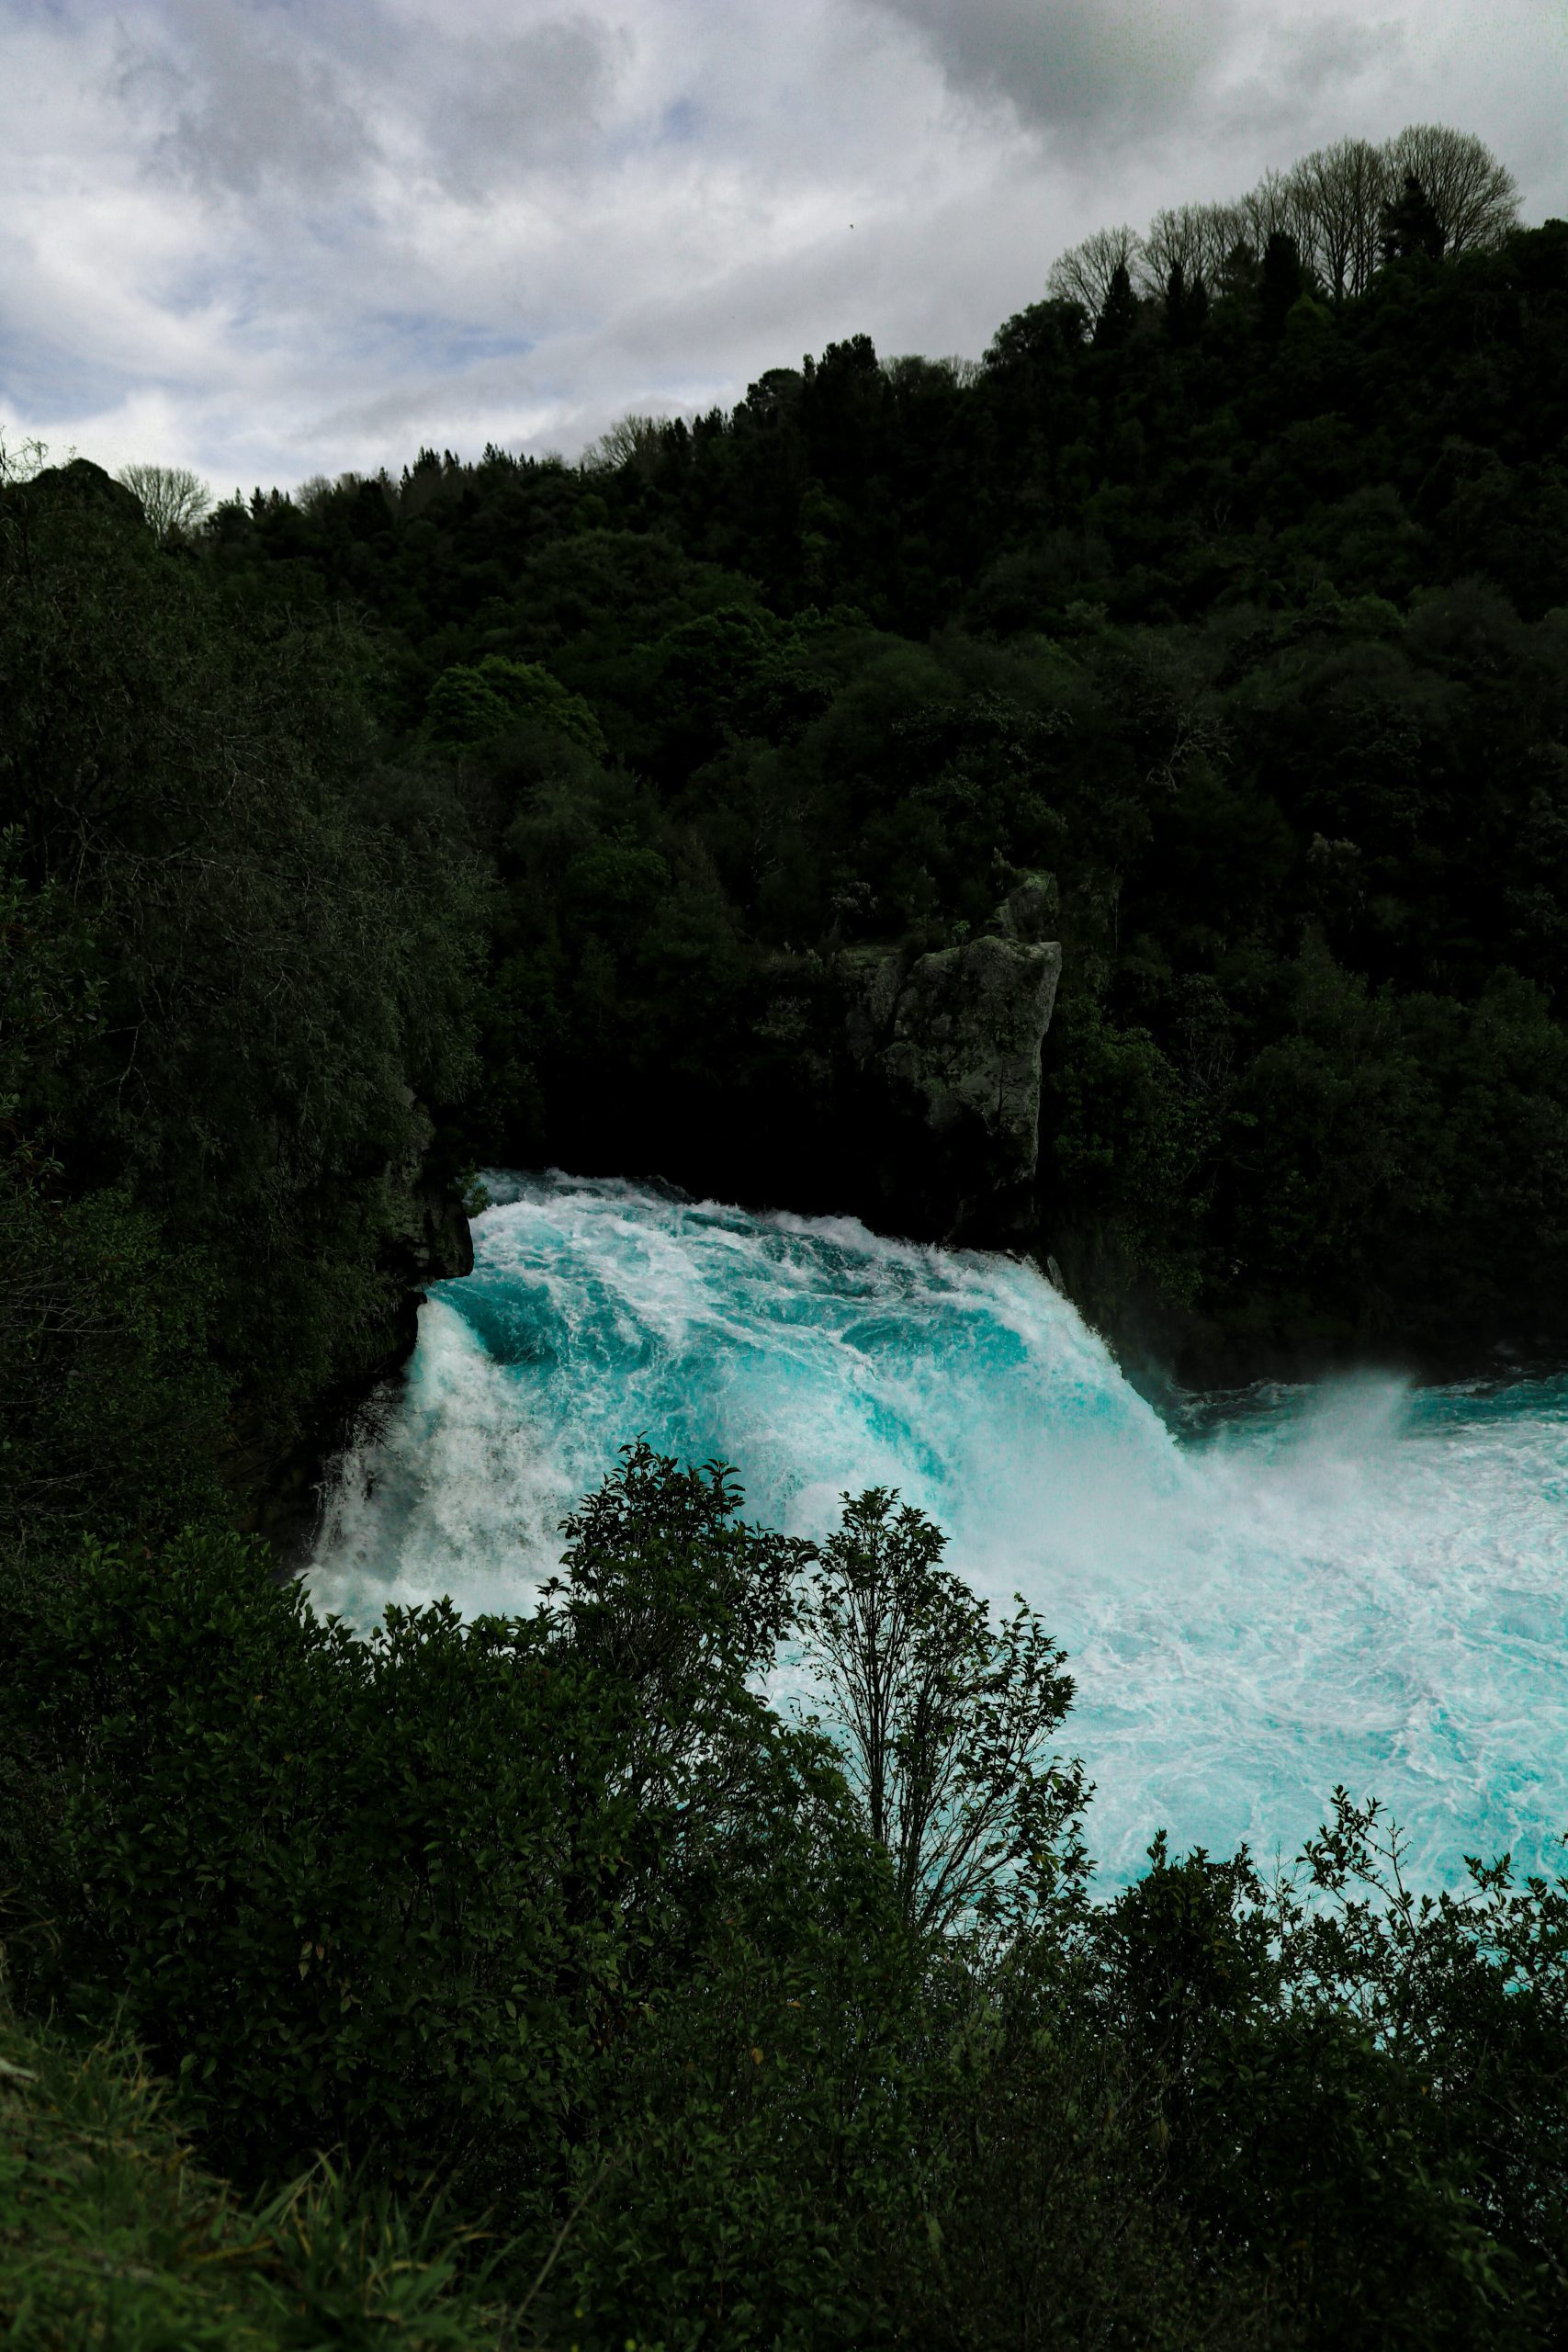 A strong waterfall cascading down into a pool creating blue foam, surrounded by trees.